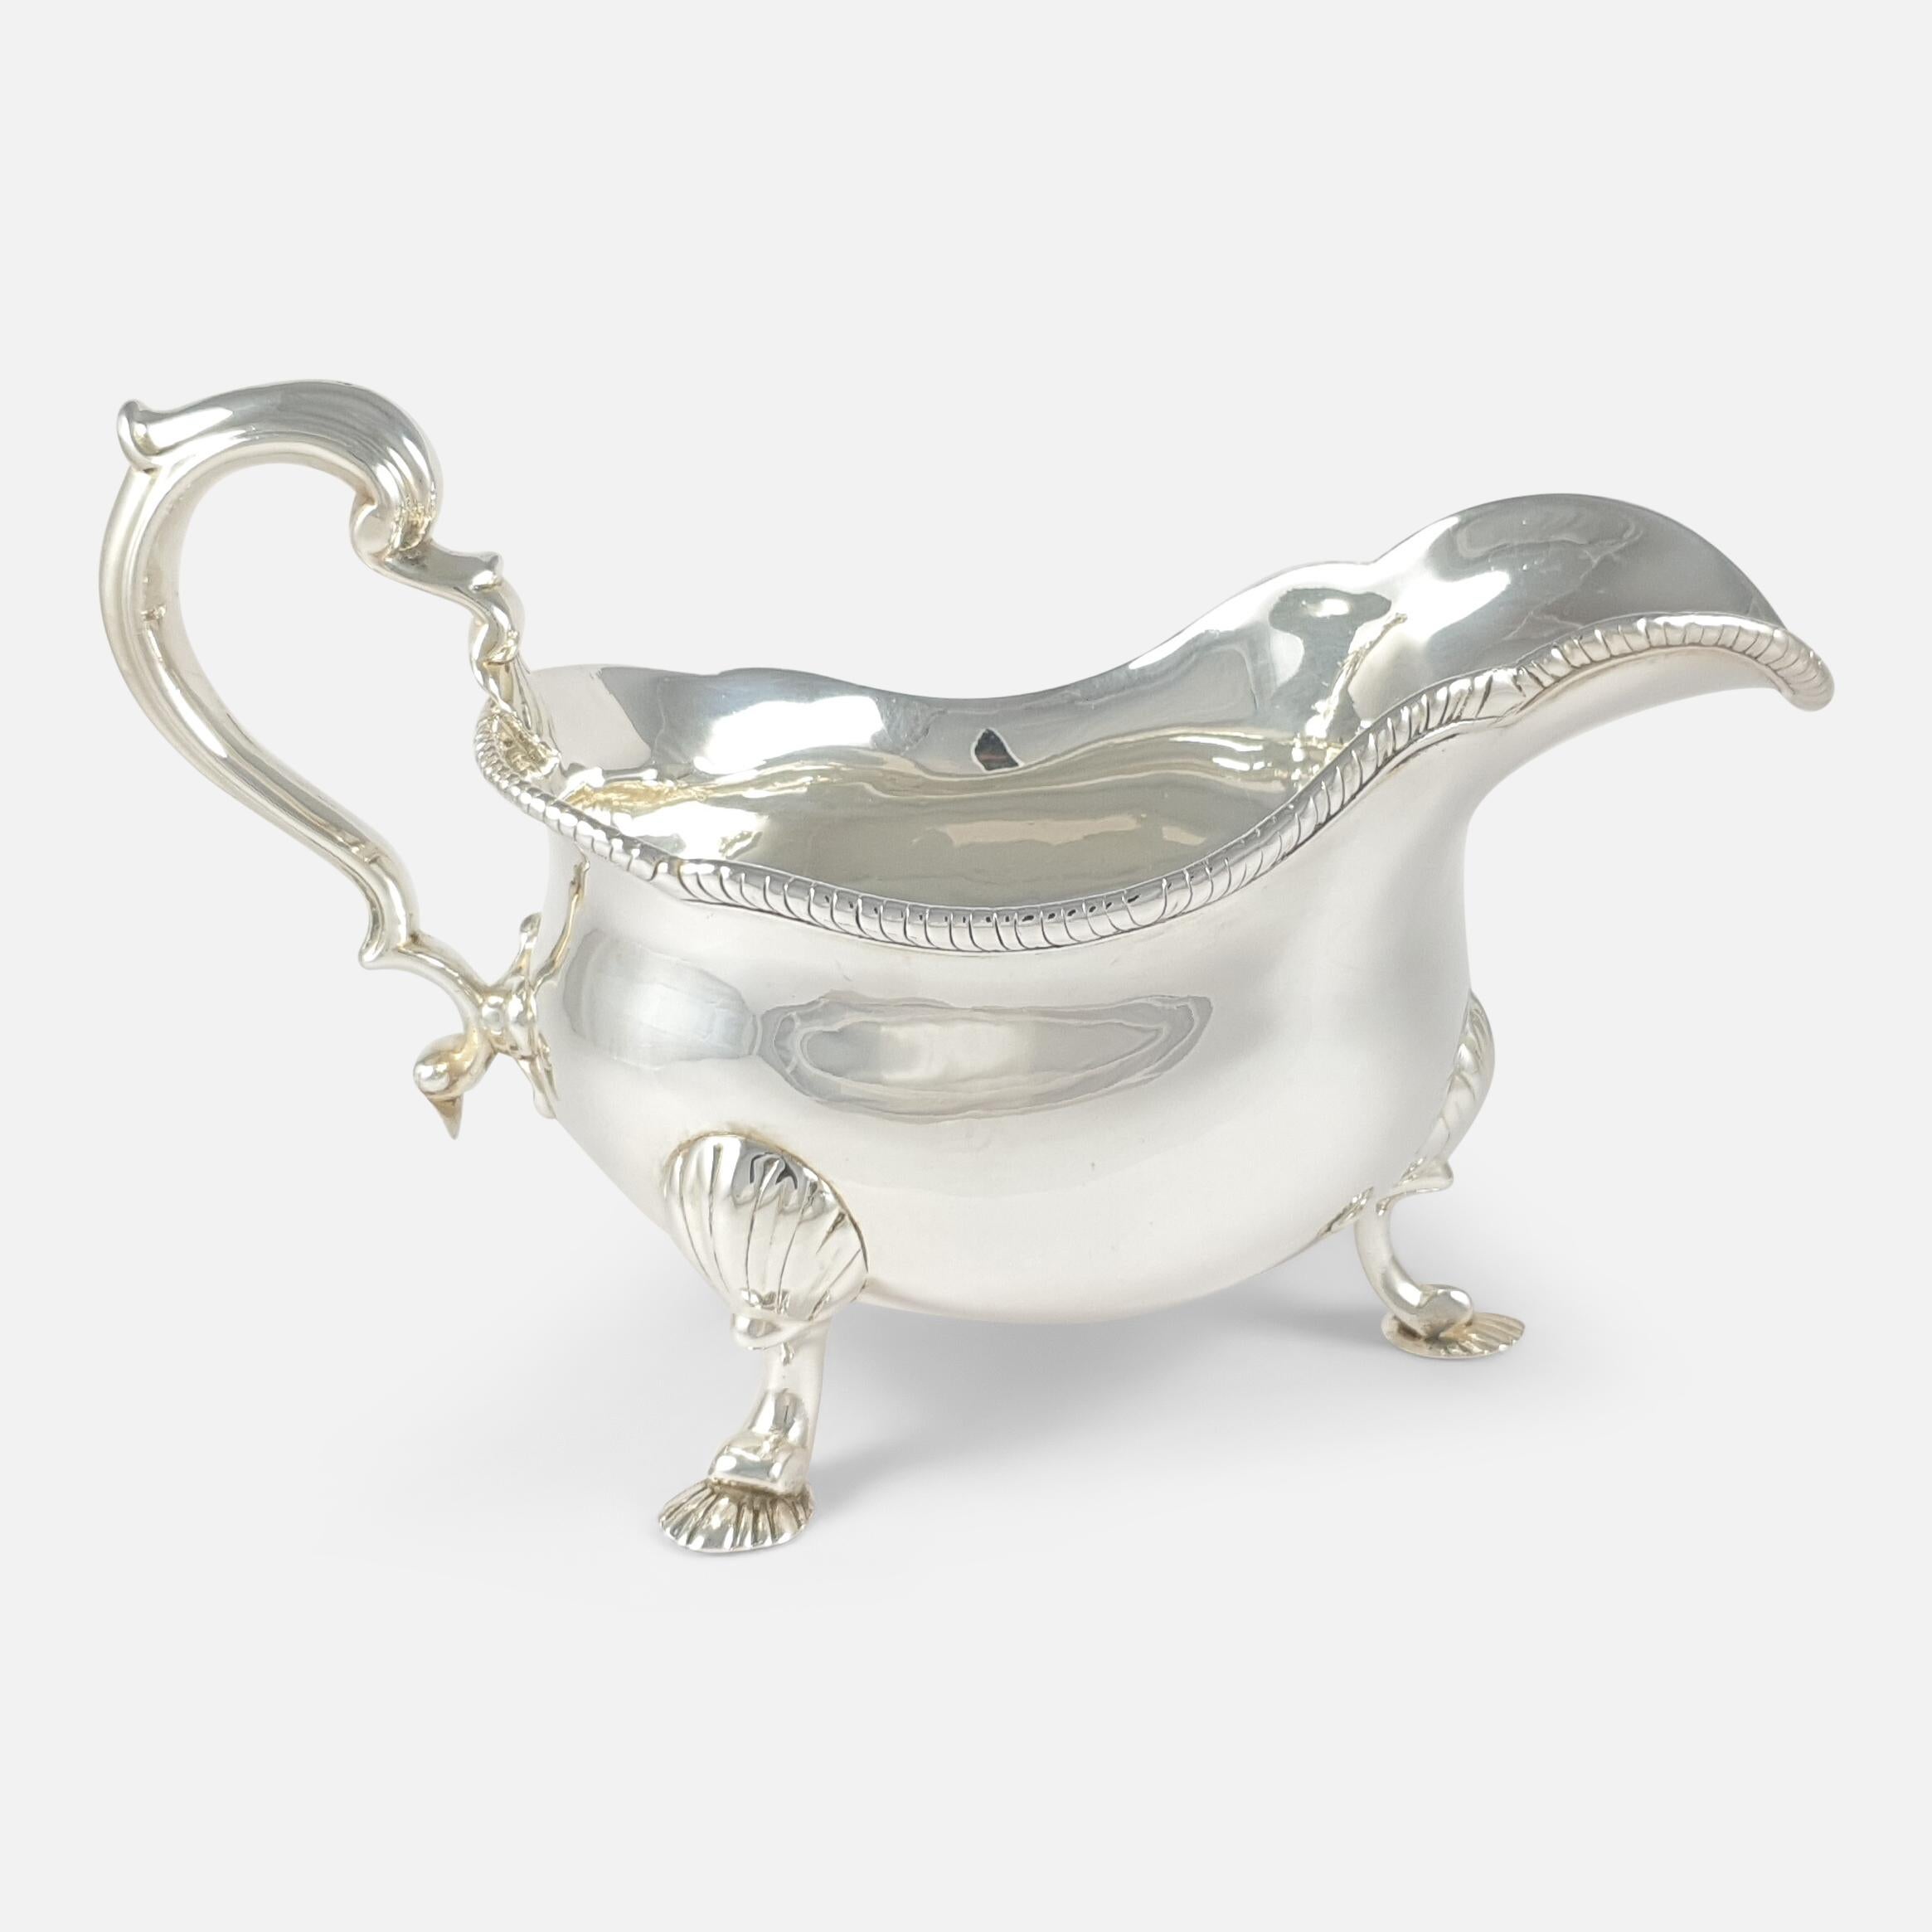 Pair of Victorian Silver Sauce Boats, D and C Houle, 1841, 1039.7 grams For Sale 1